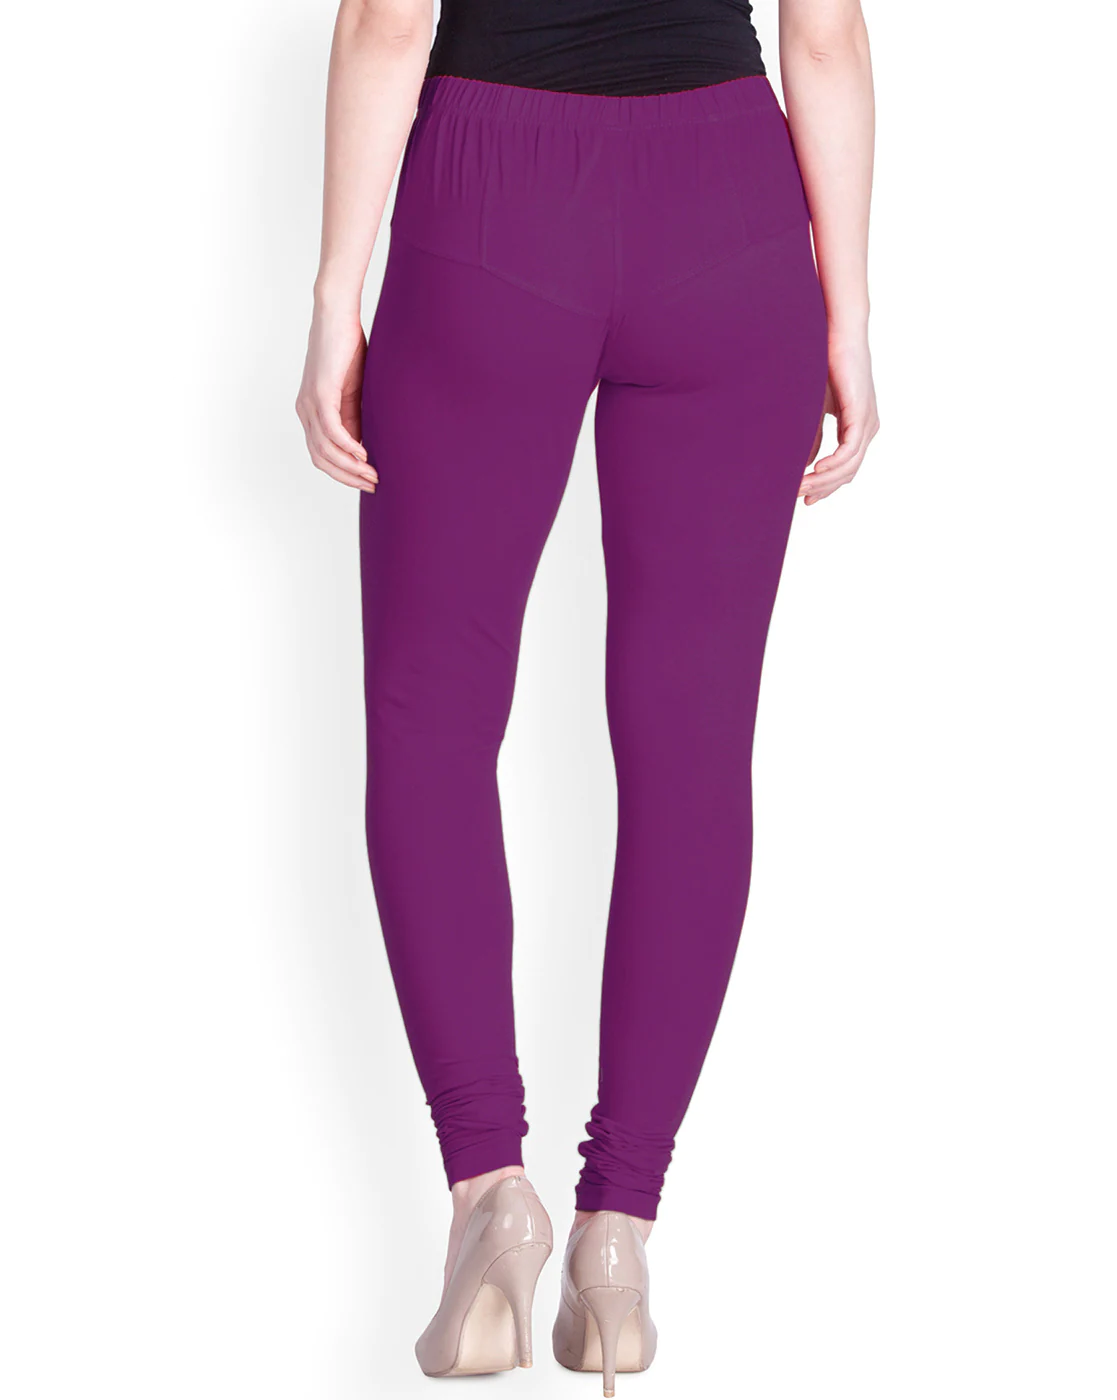 lyra leggings colors Cheap Promotional Items & Inexpensive Swag